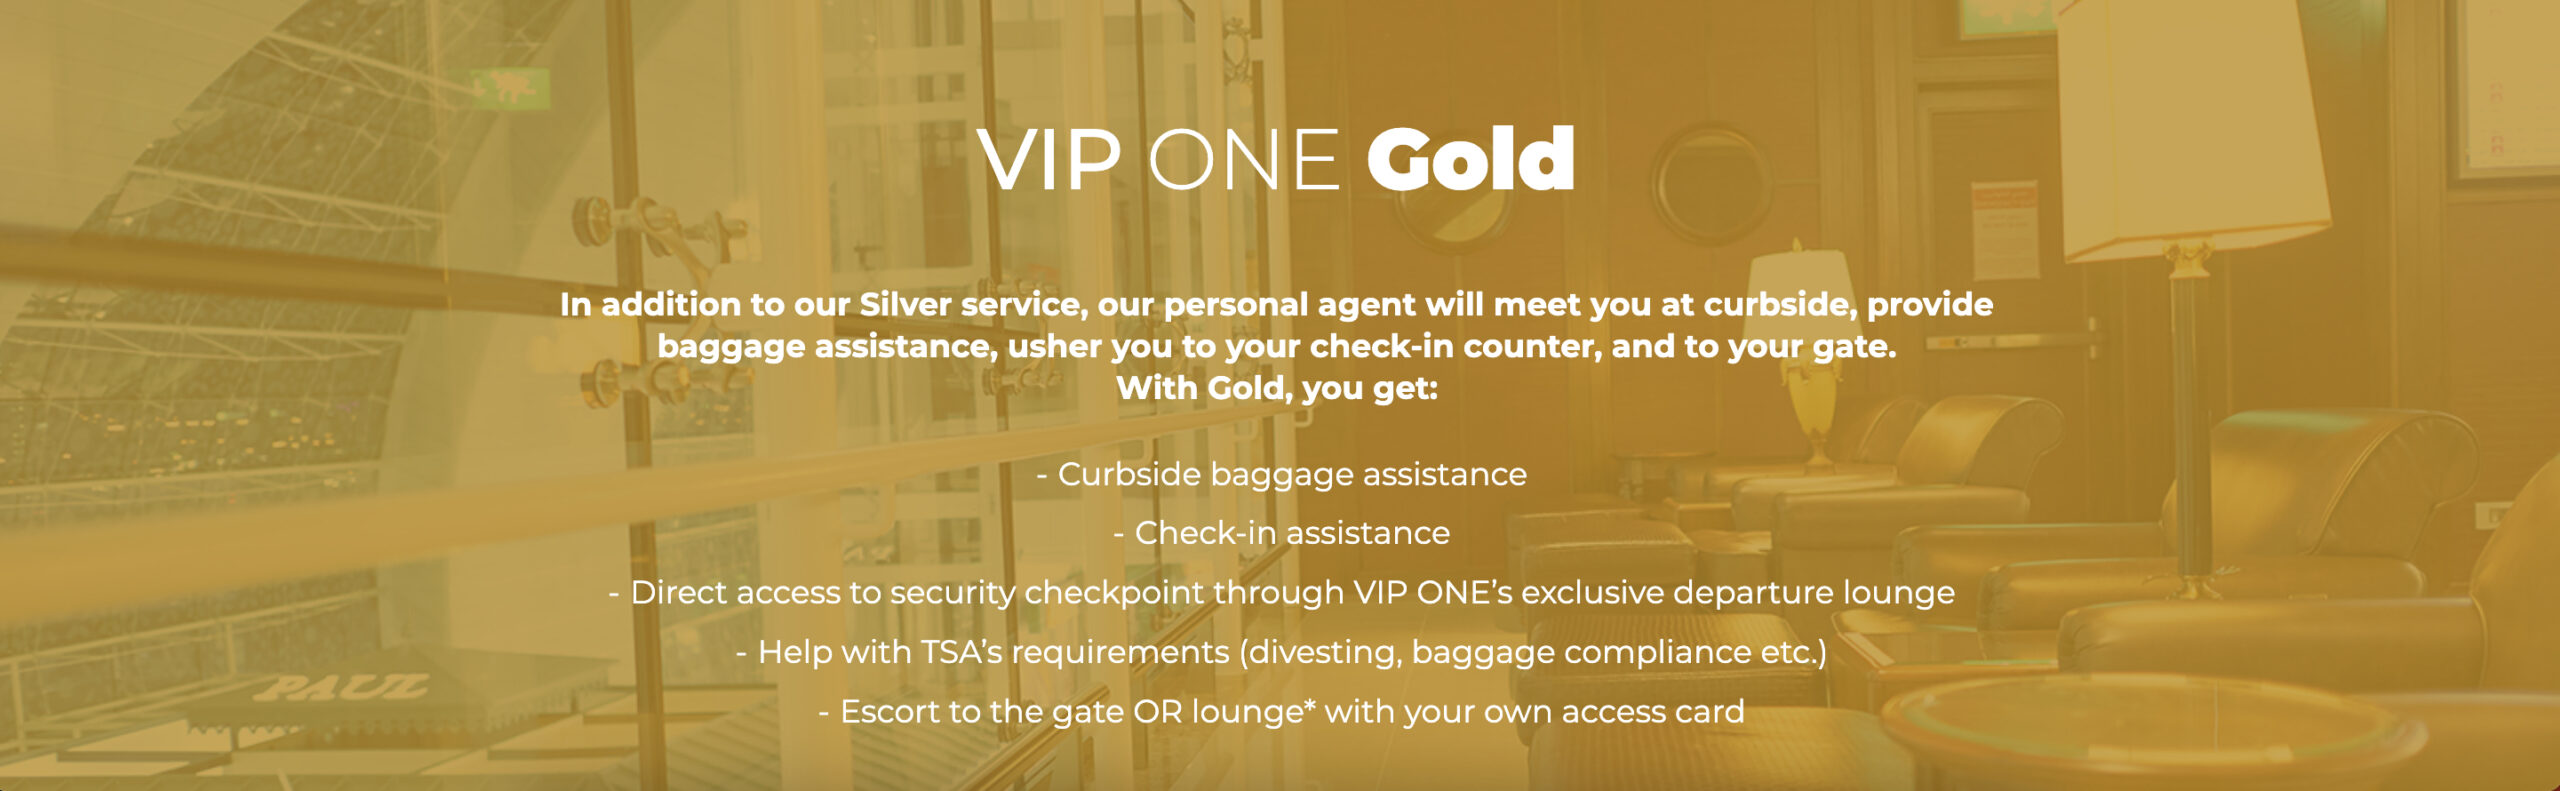 VIP ONE Gold